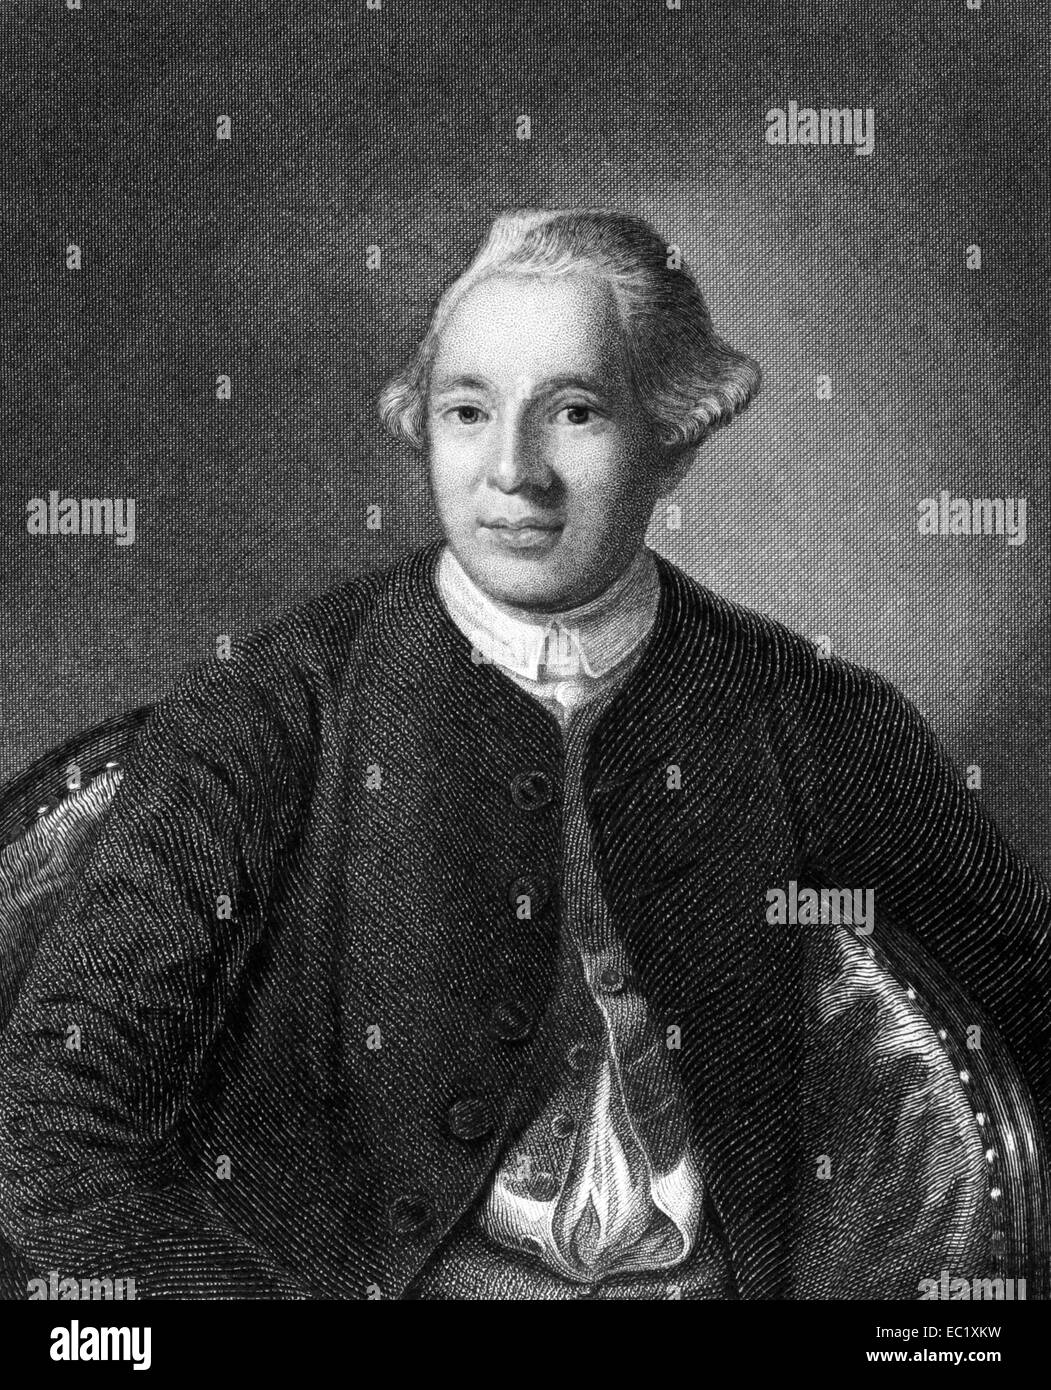 Joseph Warren (1741-1775) on engraving from 1835. American doctor who played a leading role in American Revolution. Stock Photo